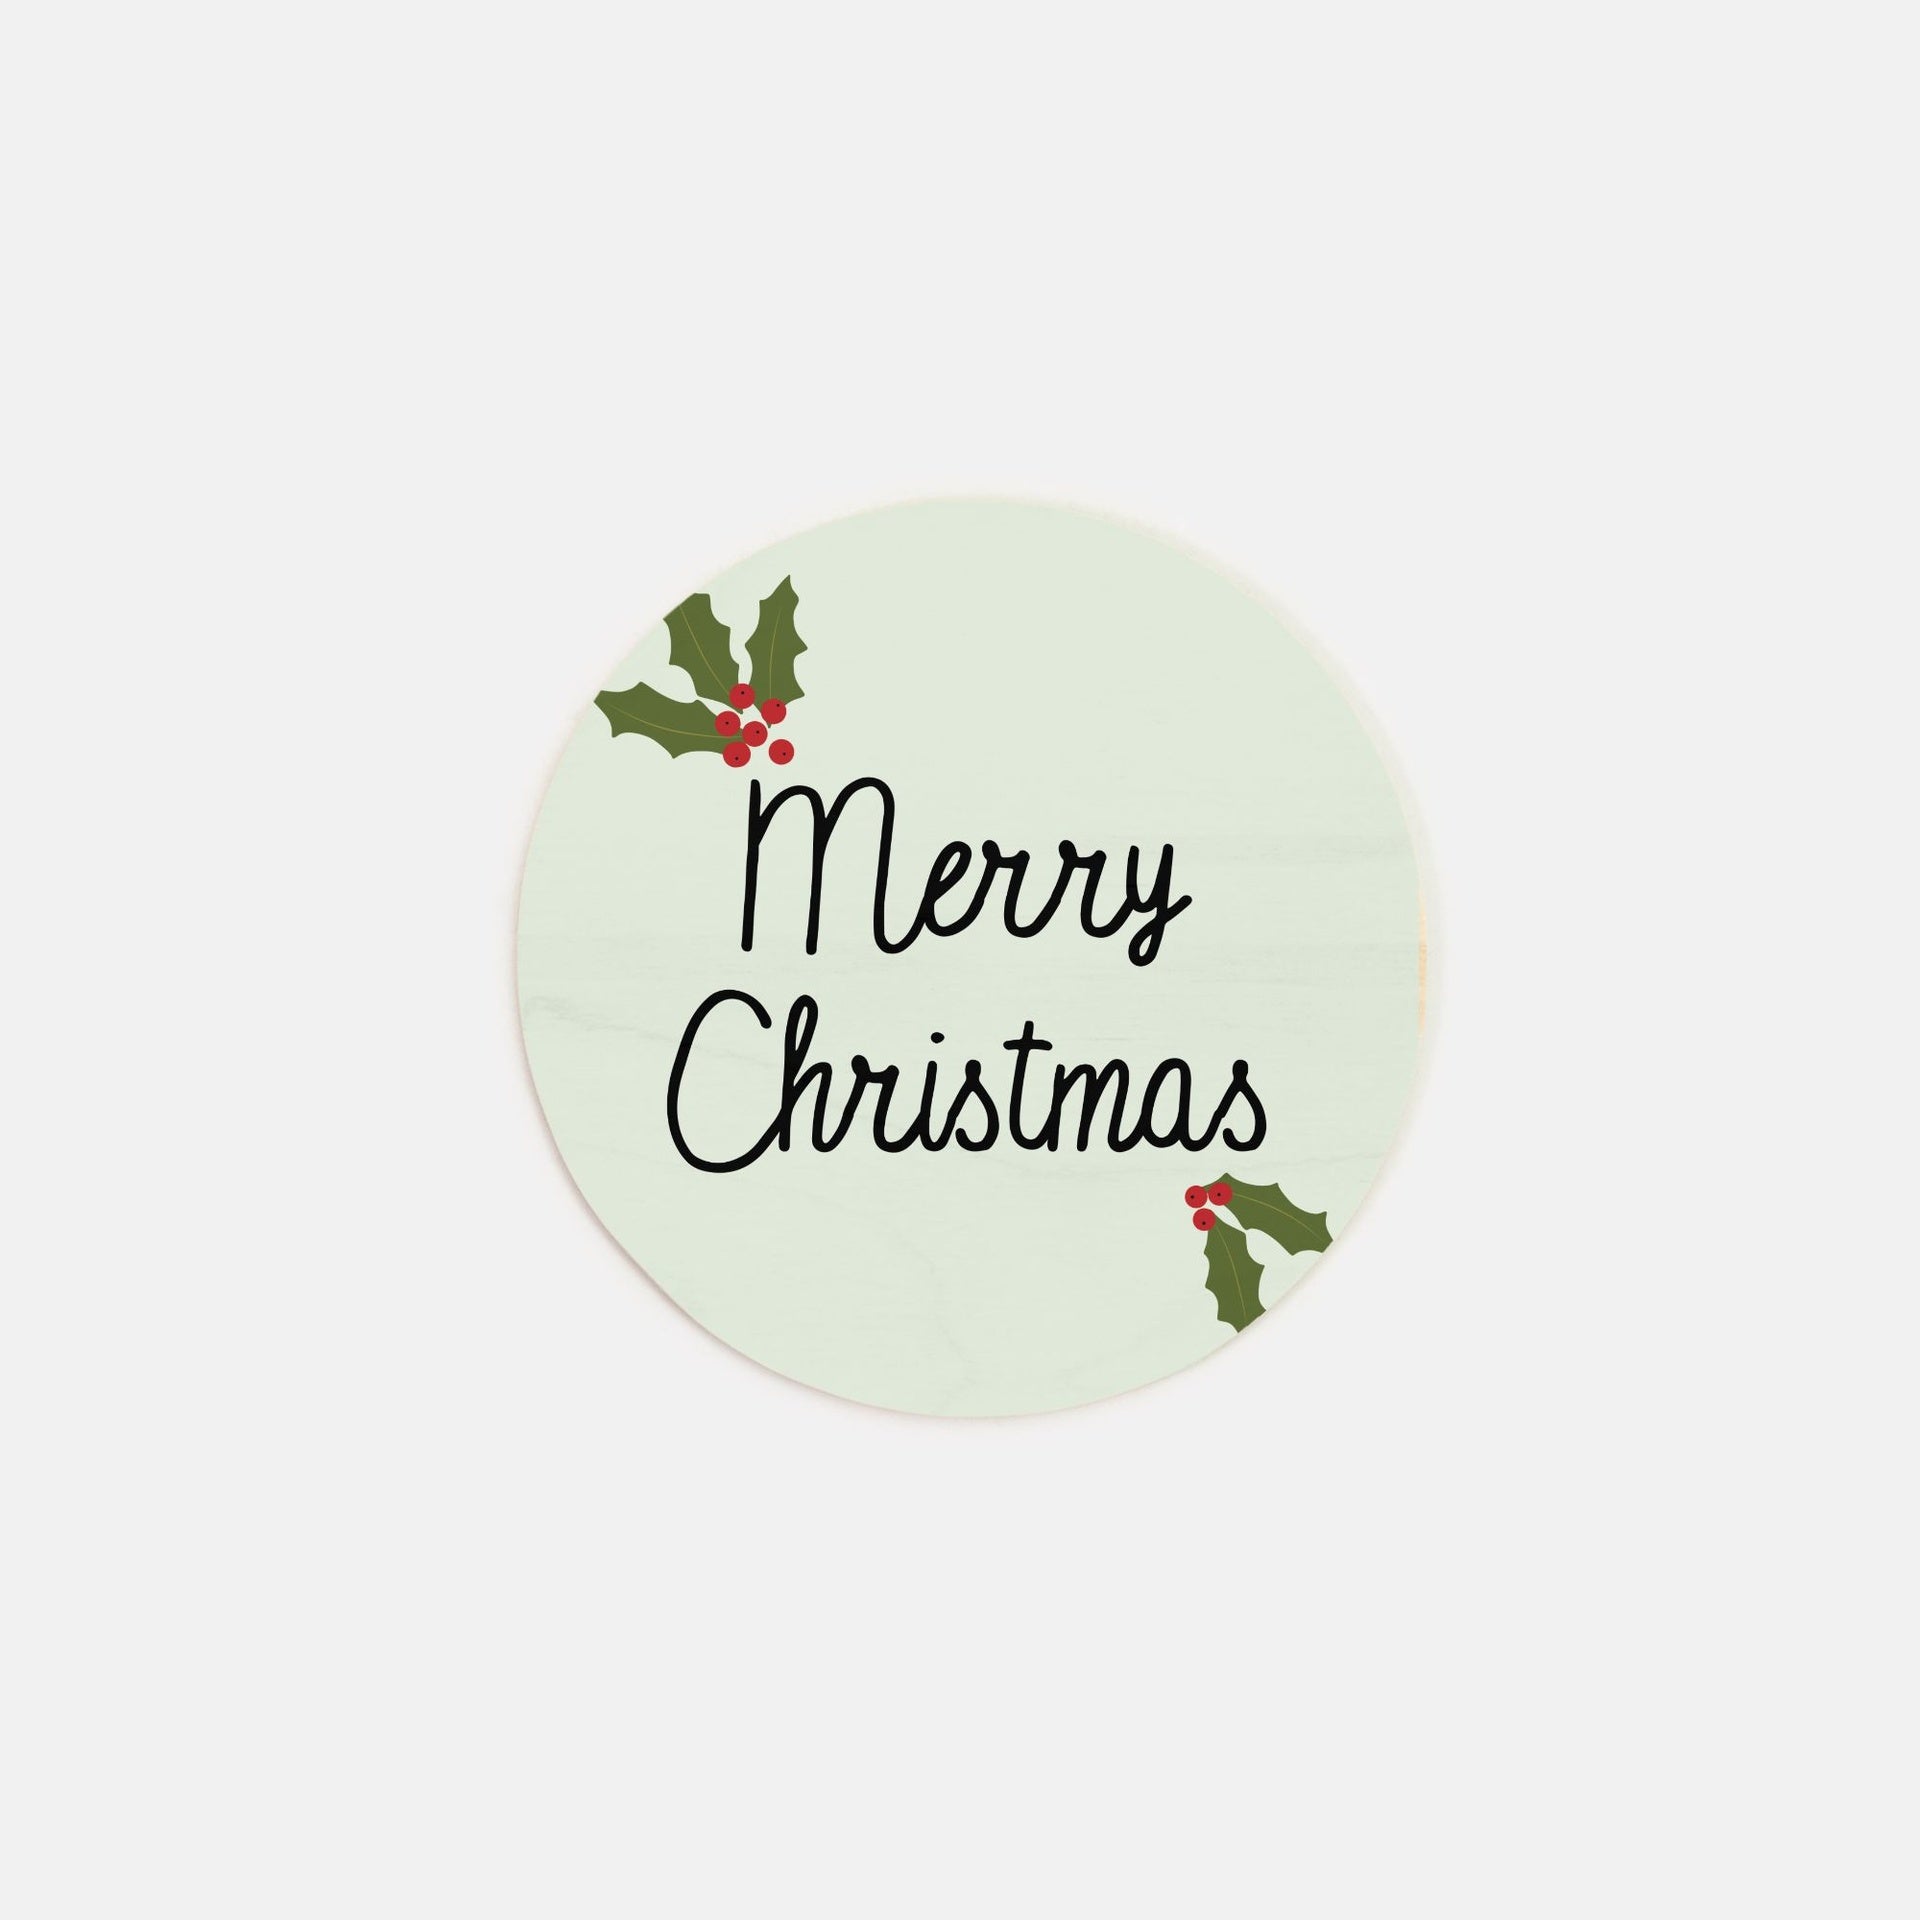 6" Round Wood Sign - Holly Merry Christmas